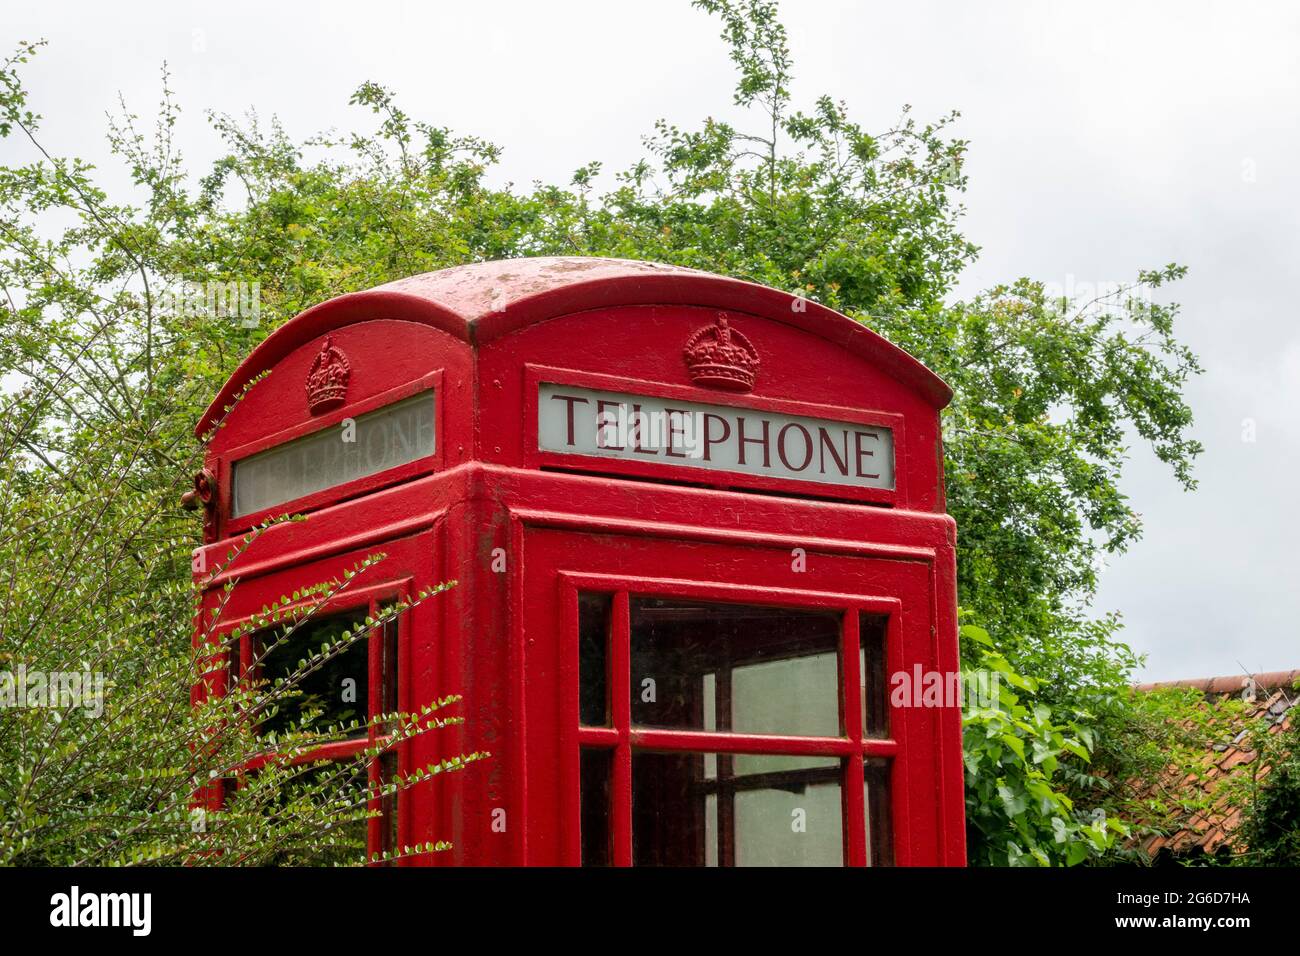 A K6 red telephone box in a rural setting Stock Photo